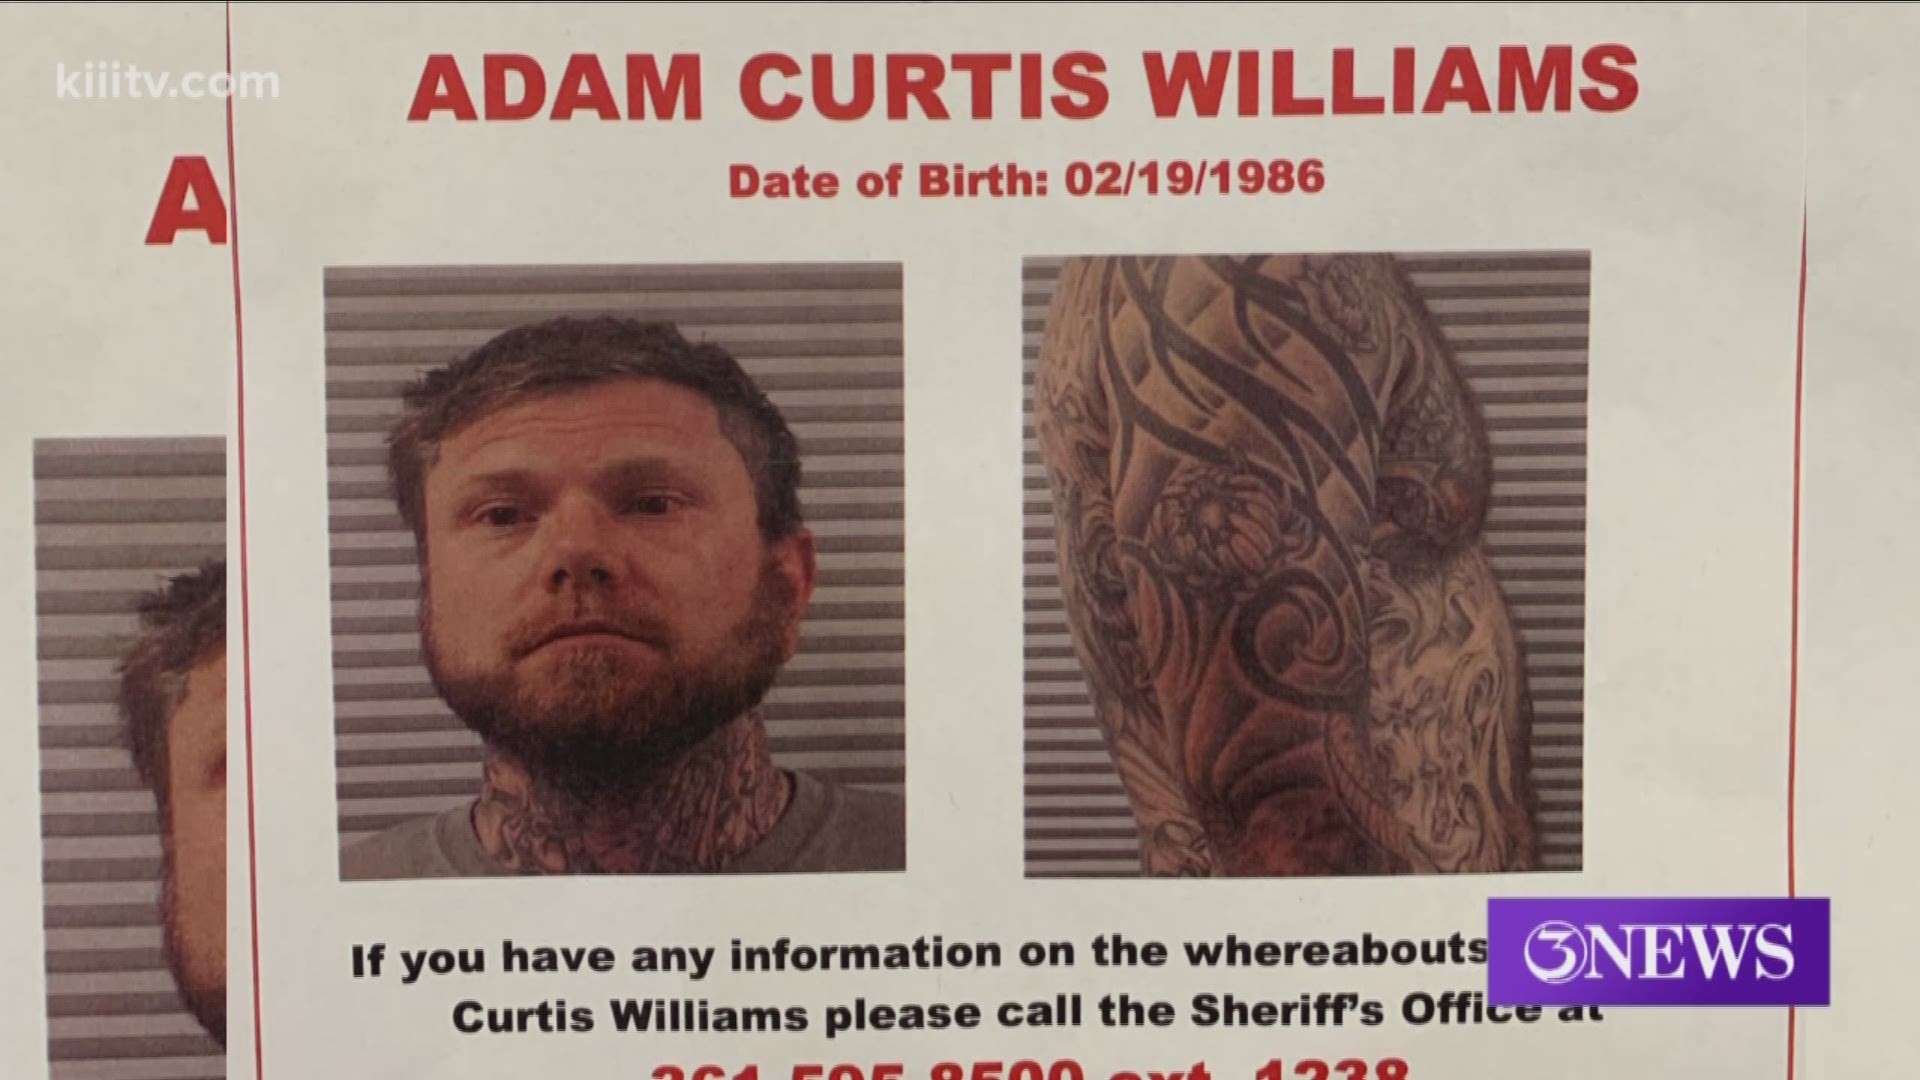 Authorities identified the man as Adam Curtis Williams and said they have obtained a warrant for his arrest.